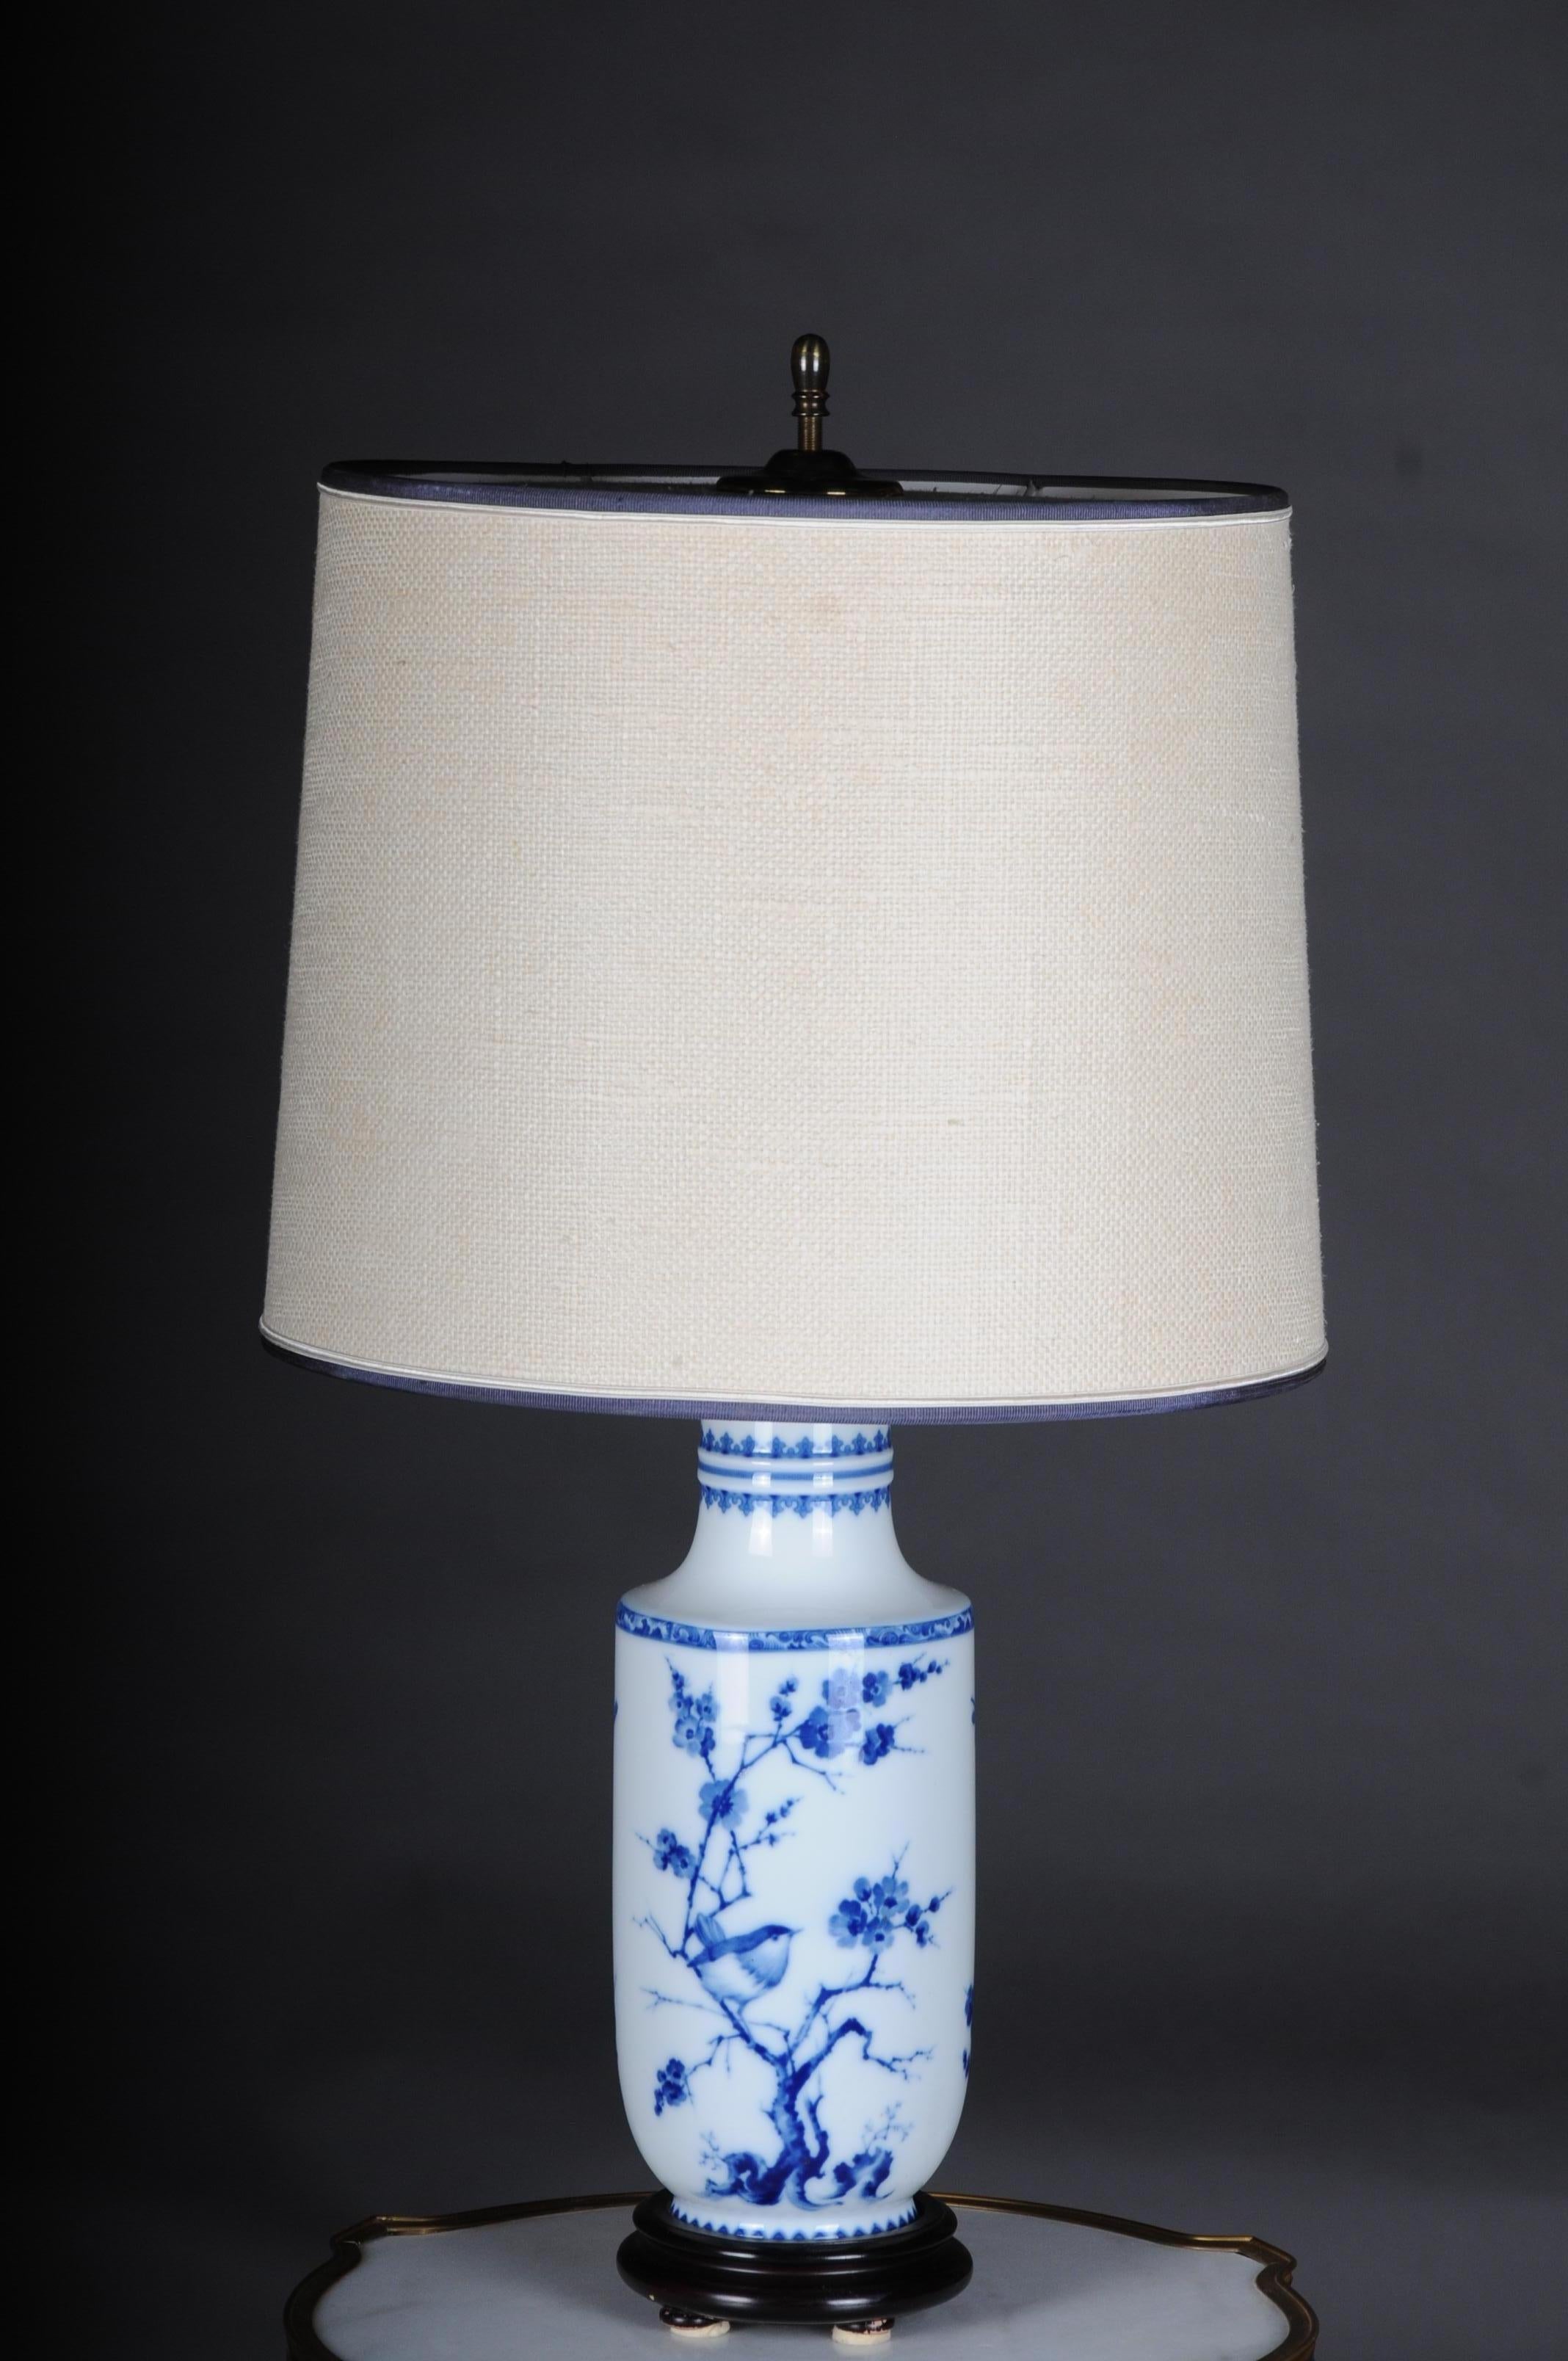 Pair of Asian table lamps or table lamps, porcelain, 20th century Asian

Underglaze blue painting on white porcelain, Asian or Asian. Electrified and tested. Extremely stylish and noble. Probably 20th century

(F-92).